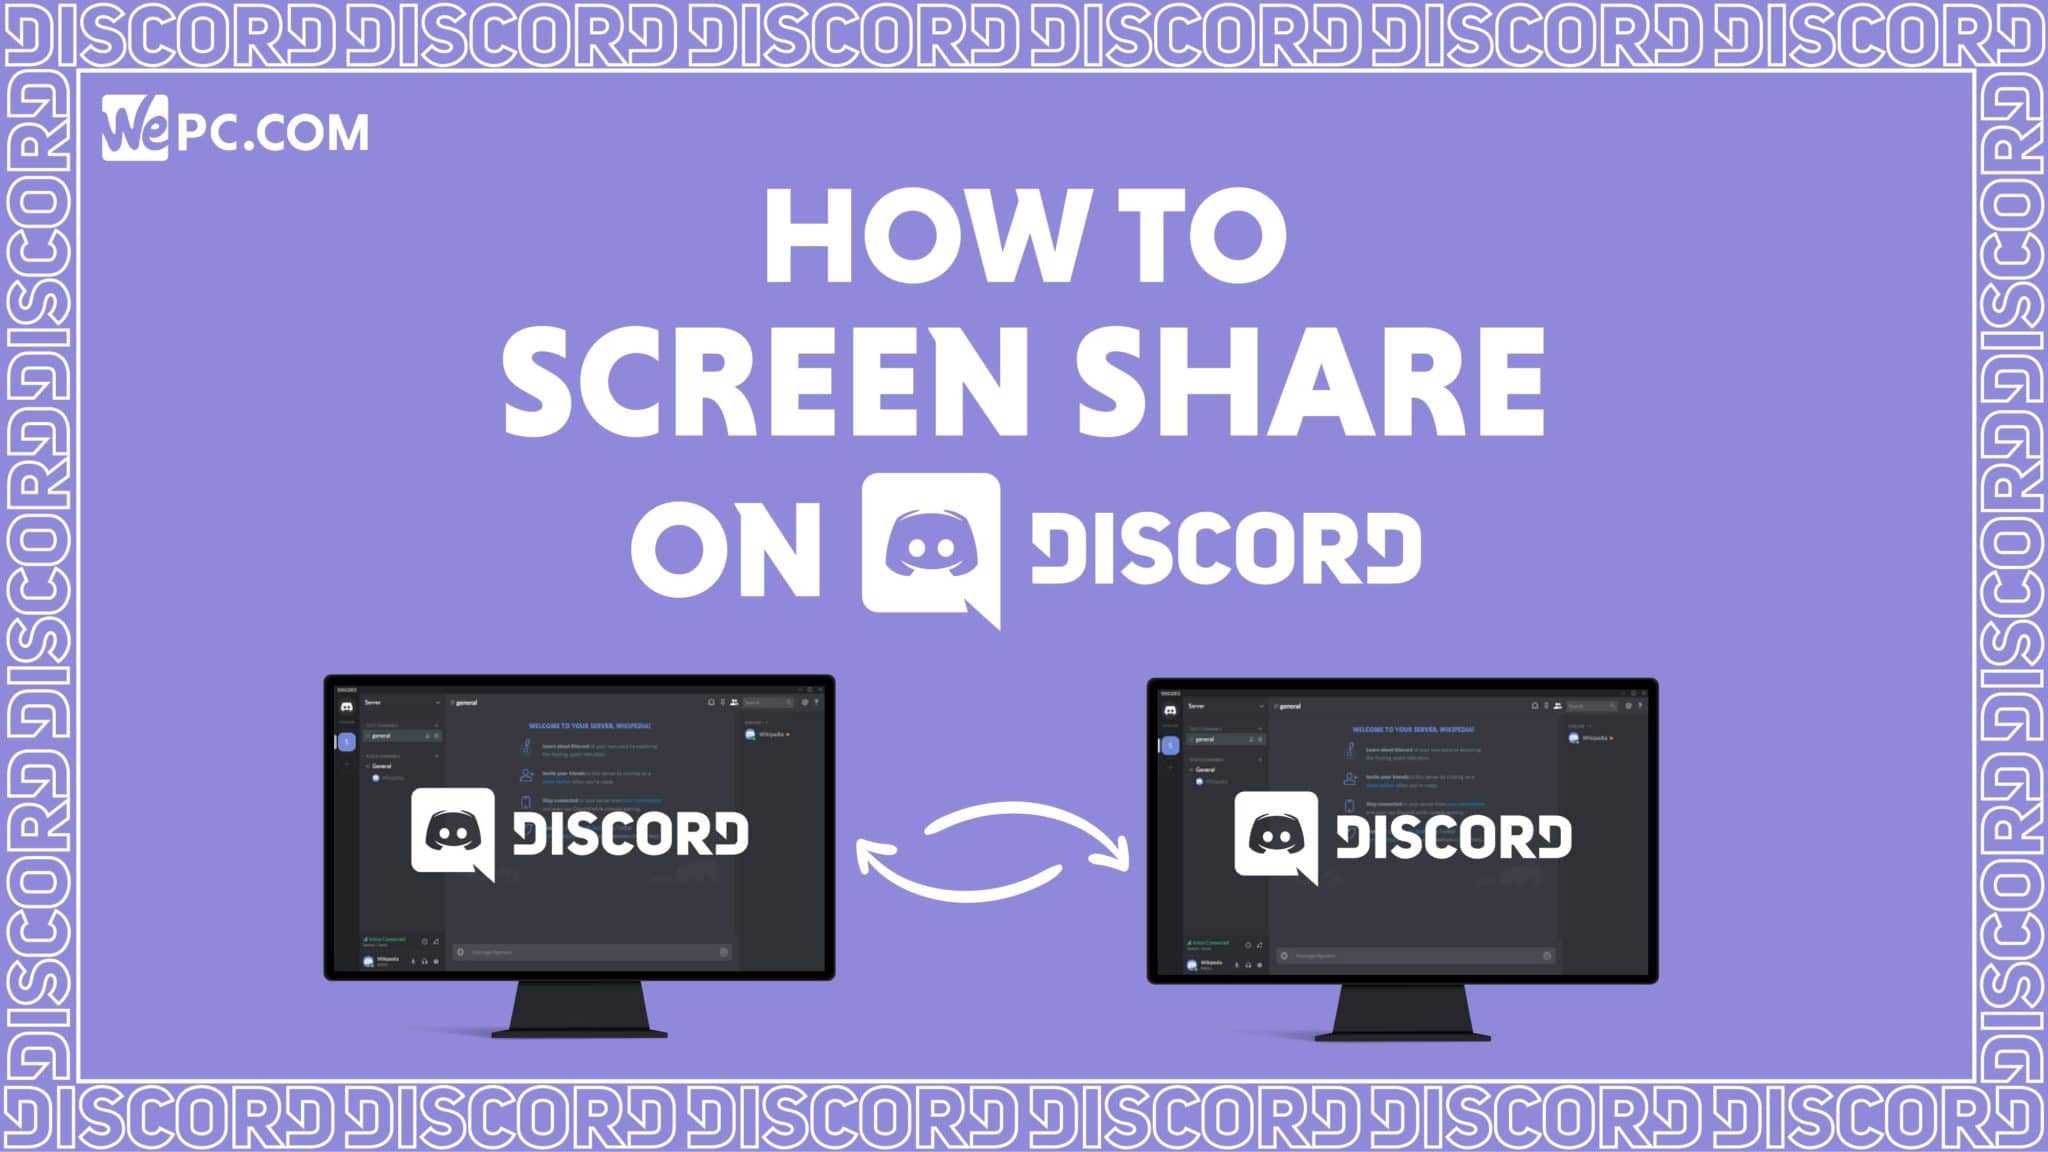 Welcome To Nintendo Life's New And Improved Discord Server - Community